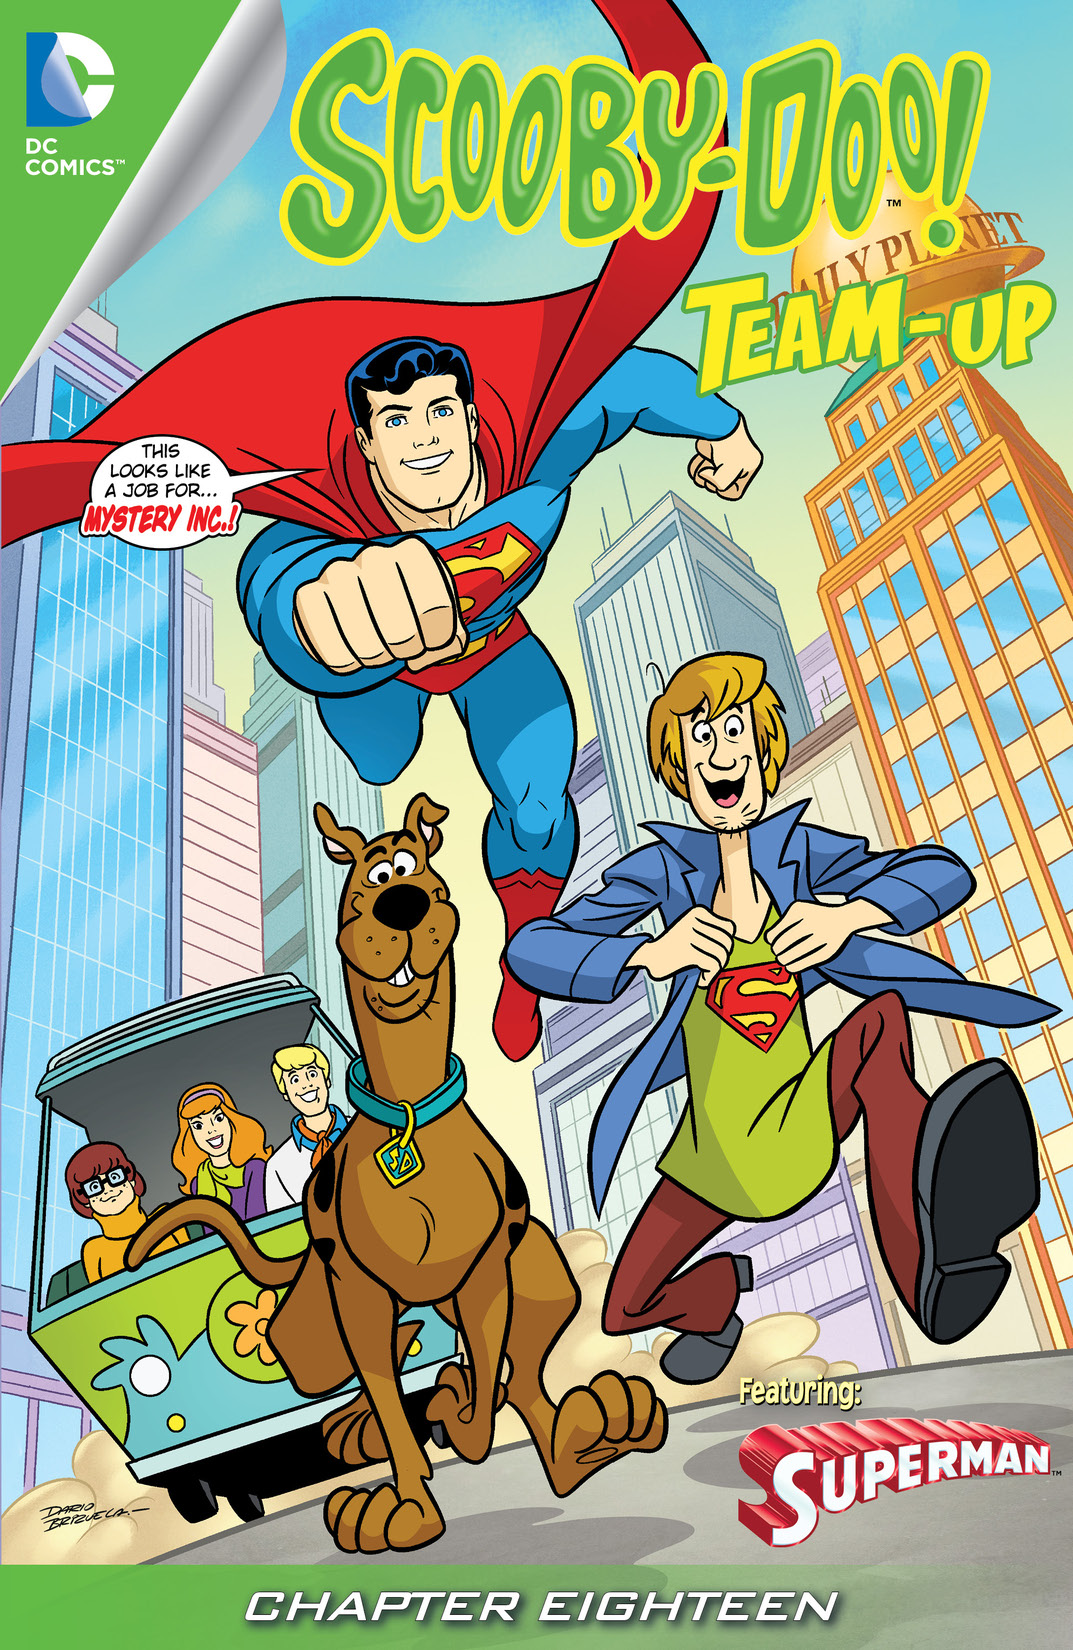 Scooby-Doo Team-Up #18 preview images